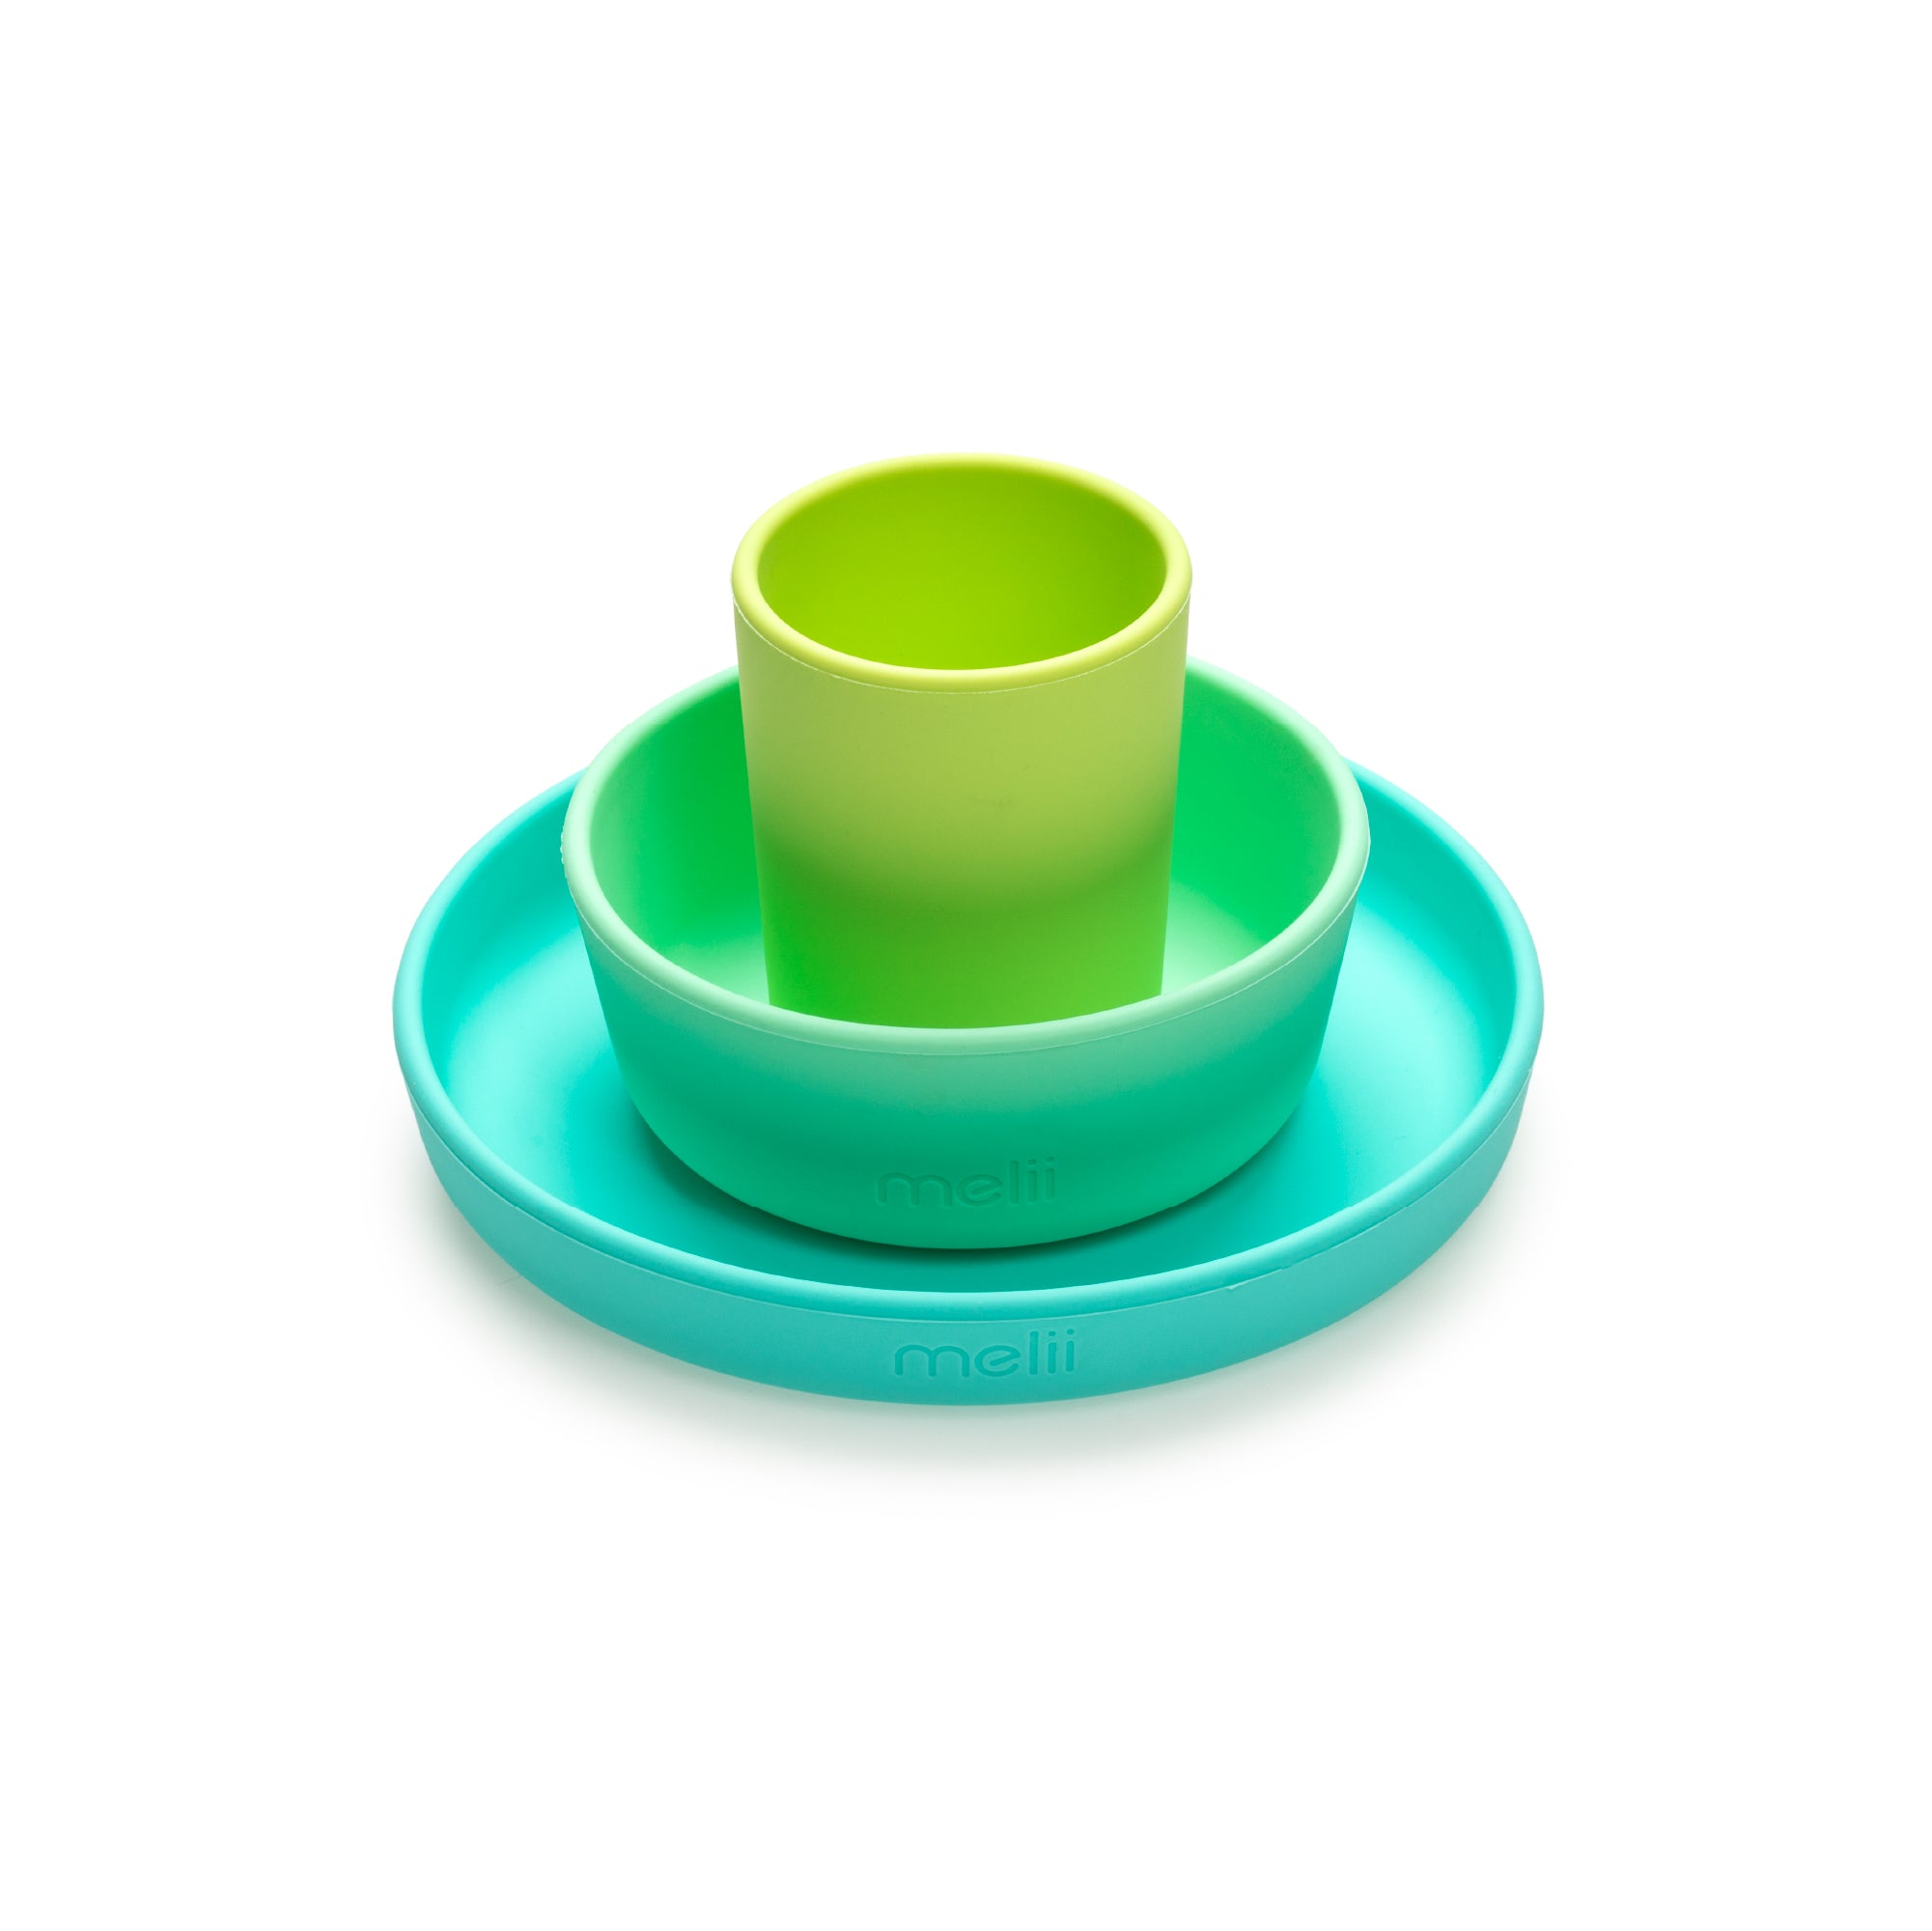 melii-3-piece-silicone-feeding-set-plate-bowl-cup-blue-lime-mint